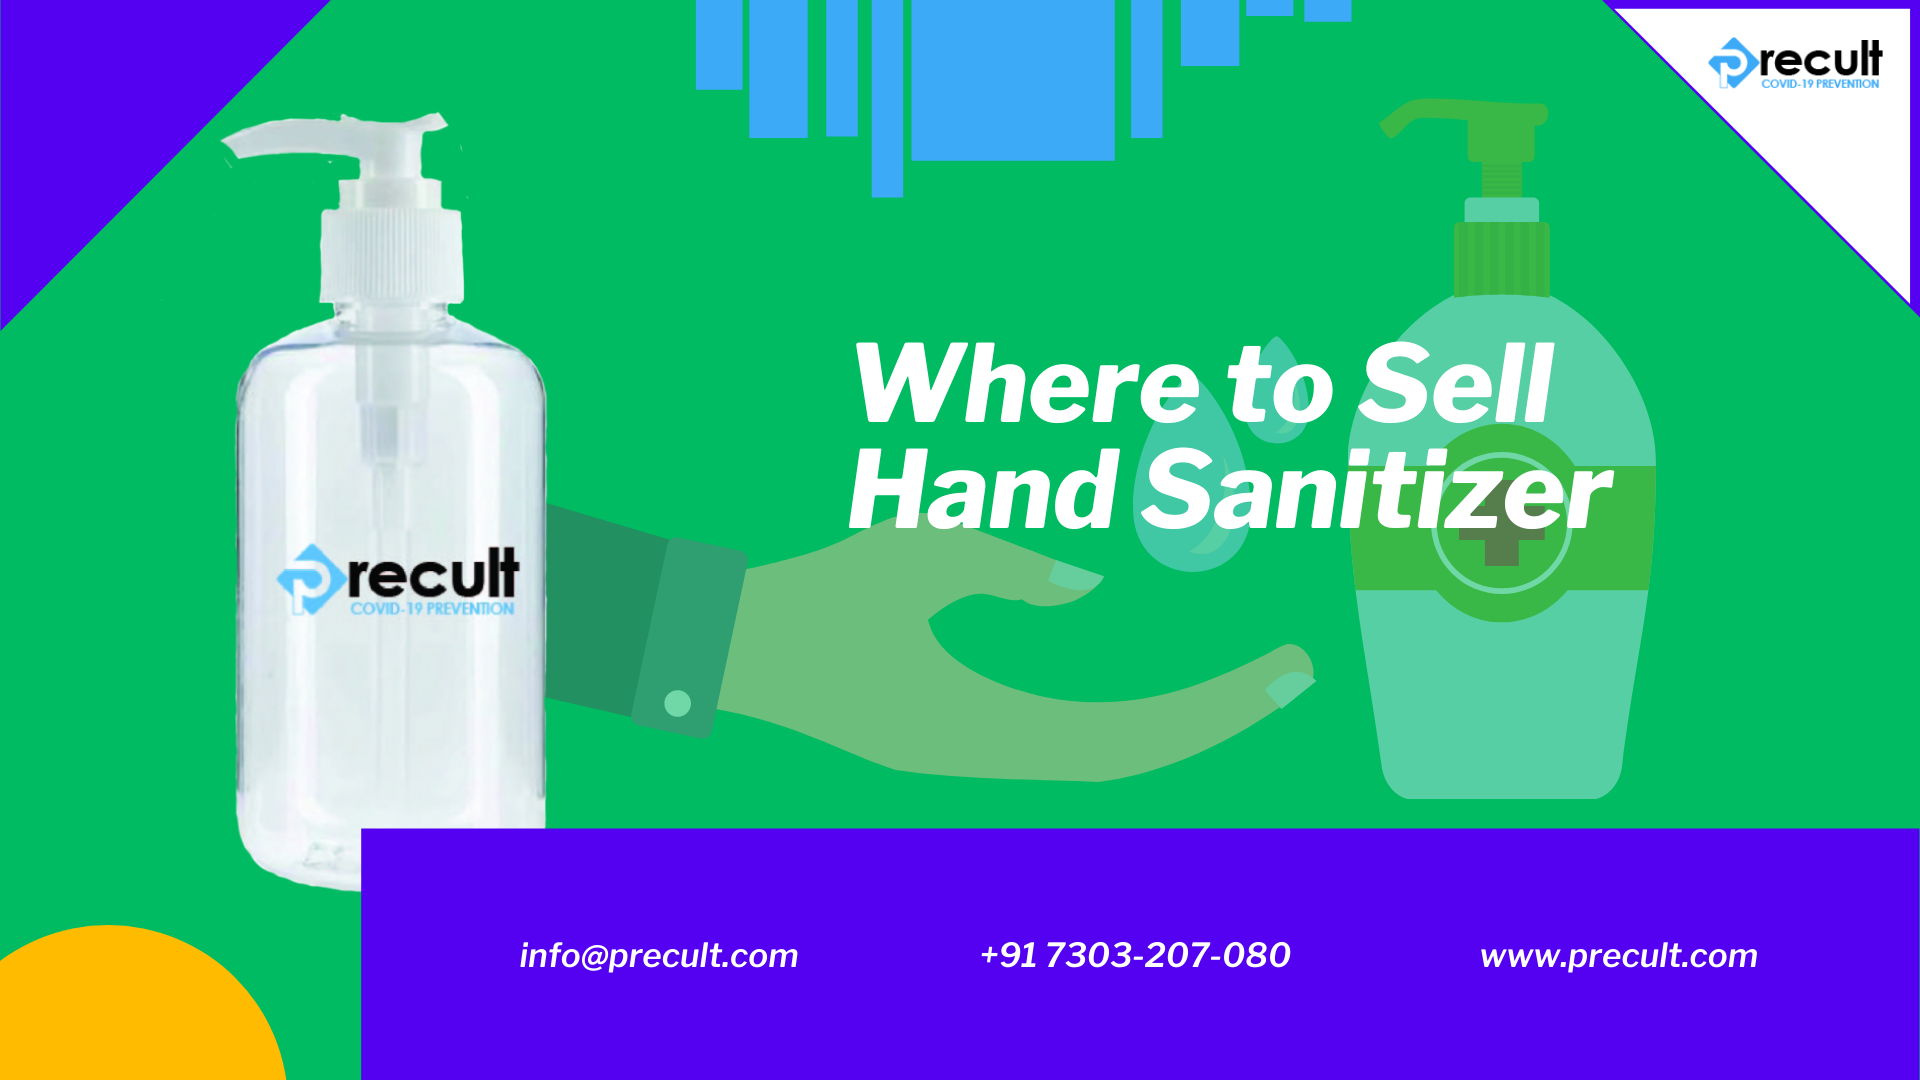 Where to Sell Hand Sanitizer